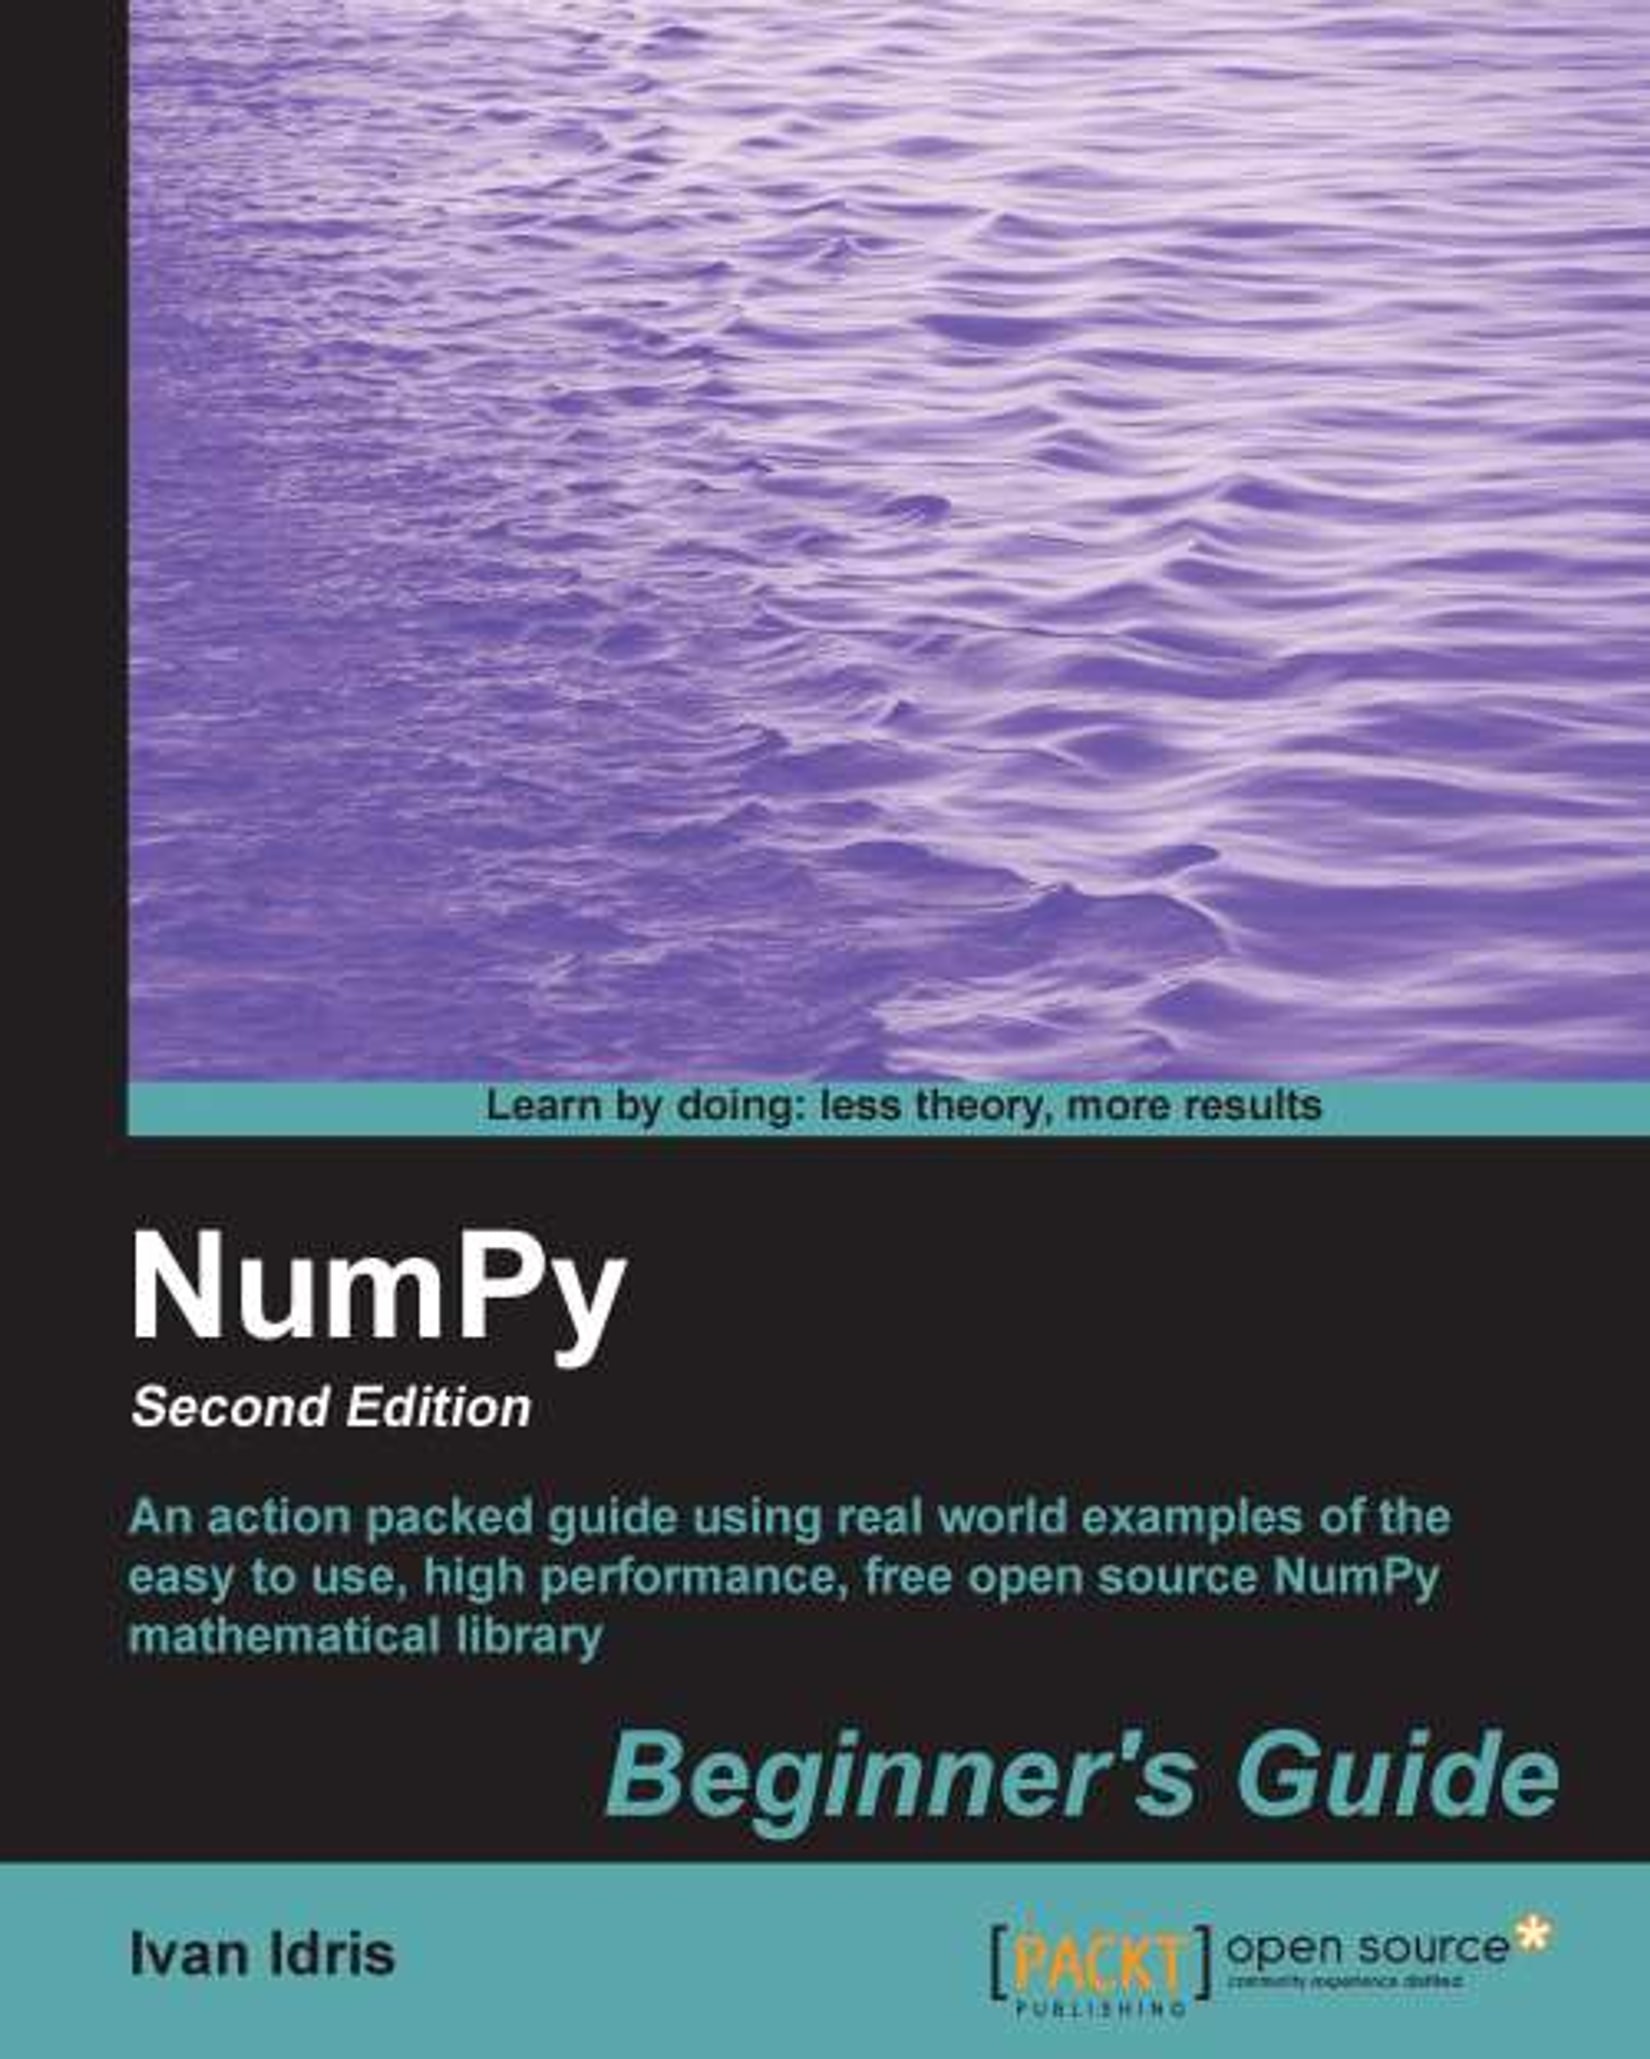 NumPy Beginner's Guide (Second Edition)